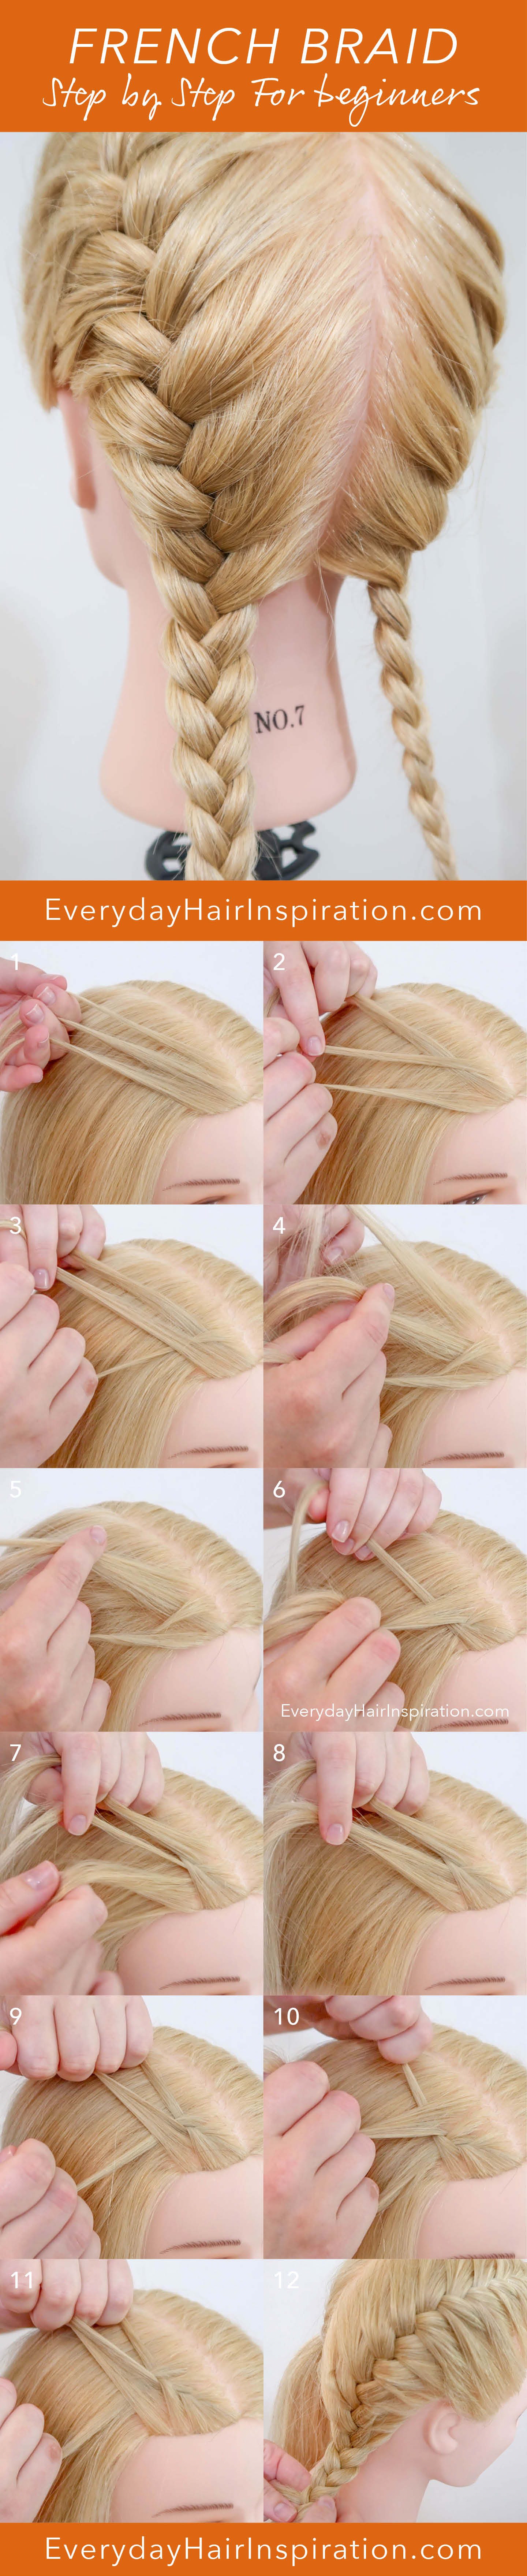 French Braid For Beginners - Easy How To Tutorial - Everyday Hair  inspiration